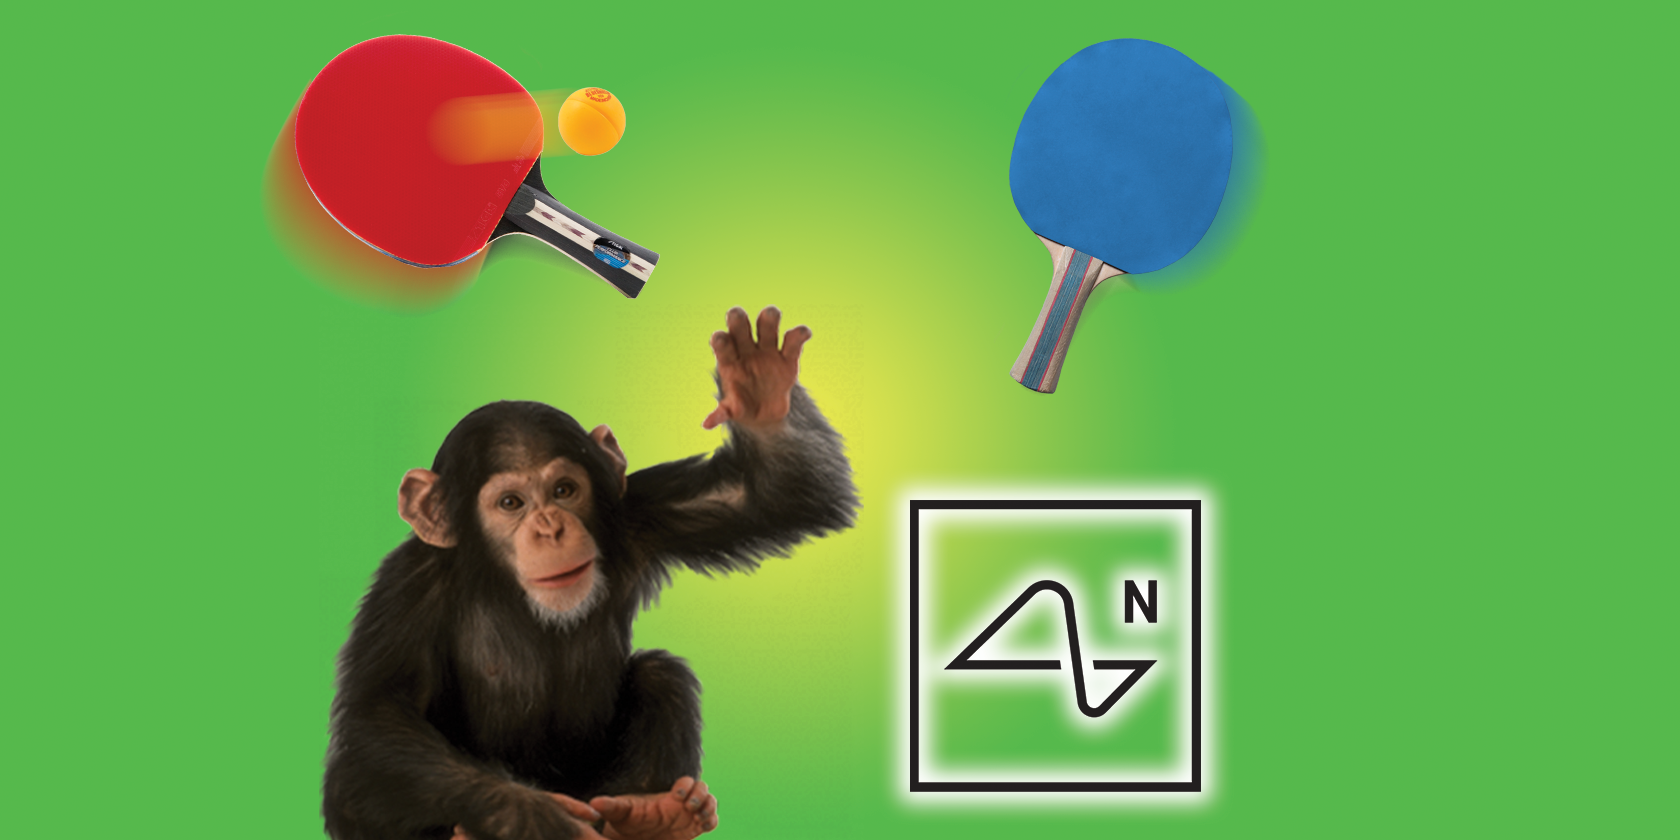 Watch This Monkey Play Pong With Its Mind Using Elon Musk's Neuralink